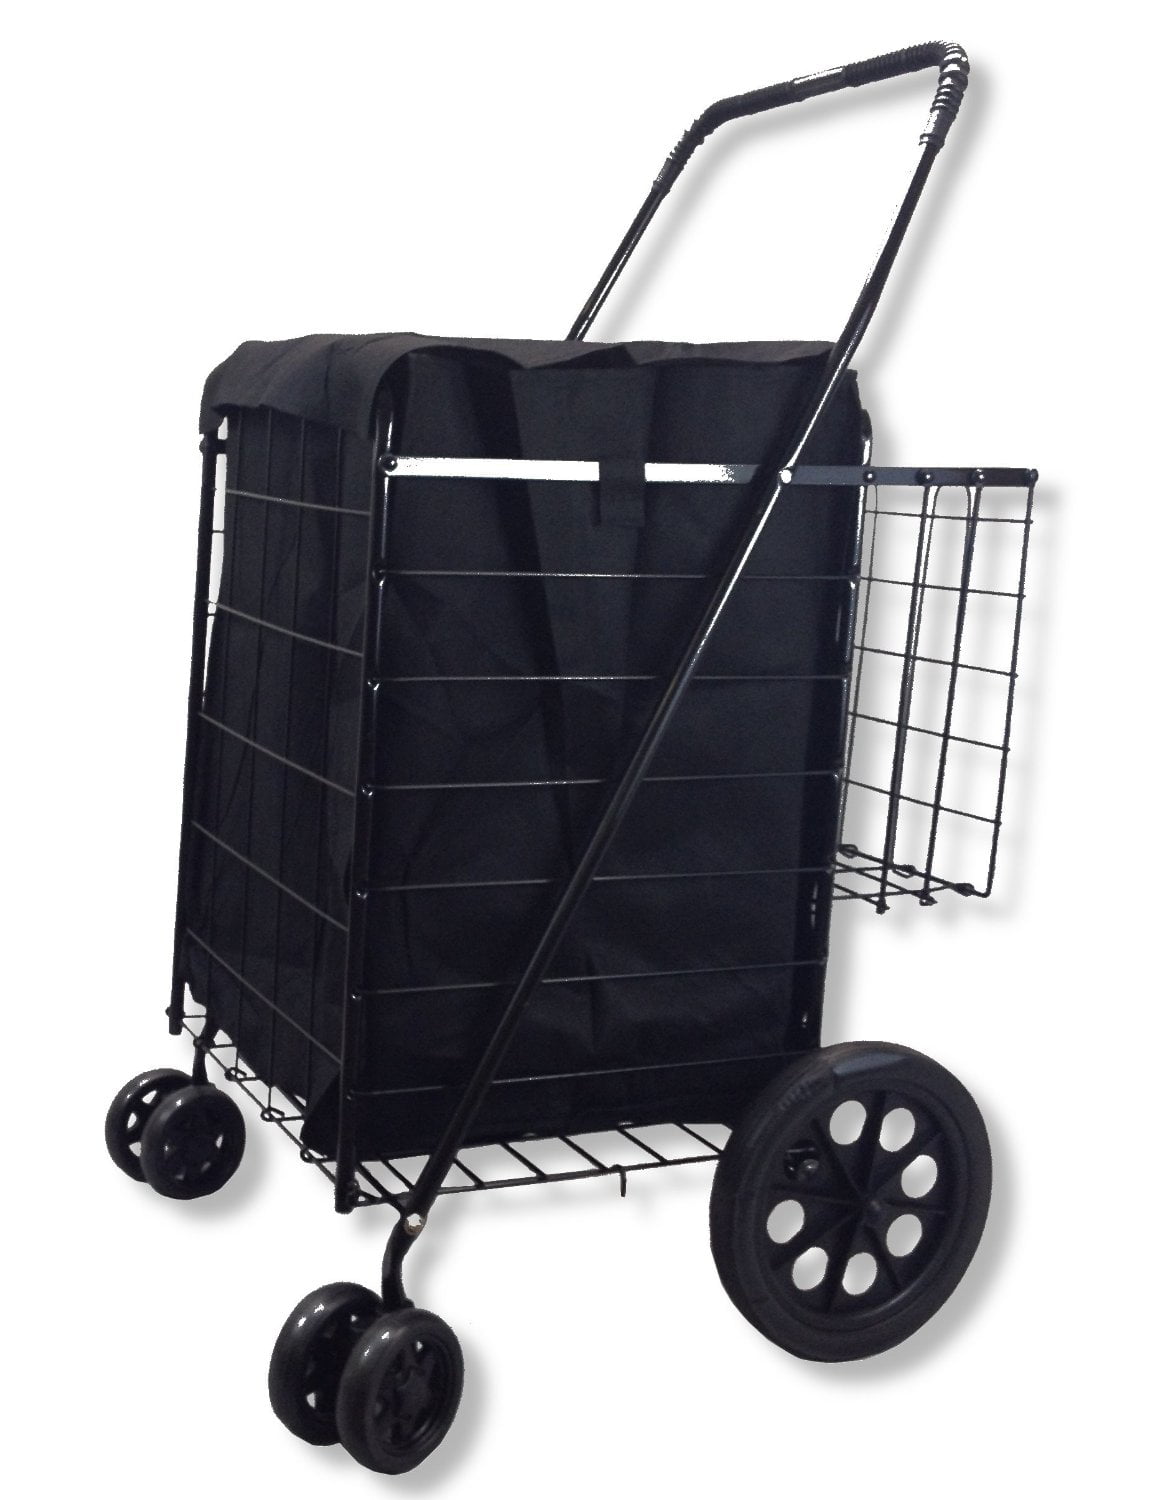 Details about   Folding Shopping Cart DOUBLE BASKET SWIVEL Wheel Jumbo 360 Easy Rotation WITH... 